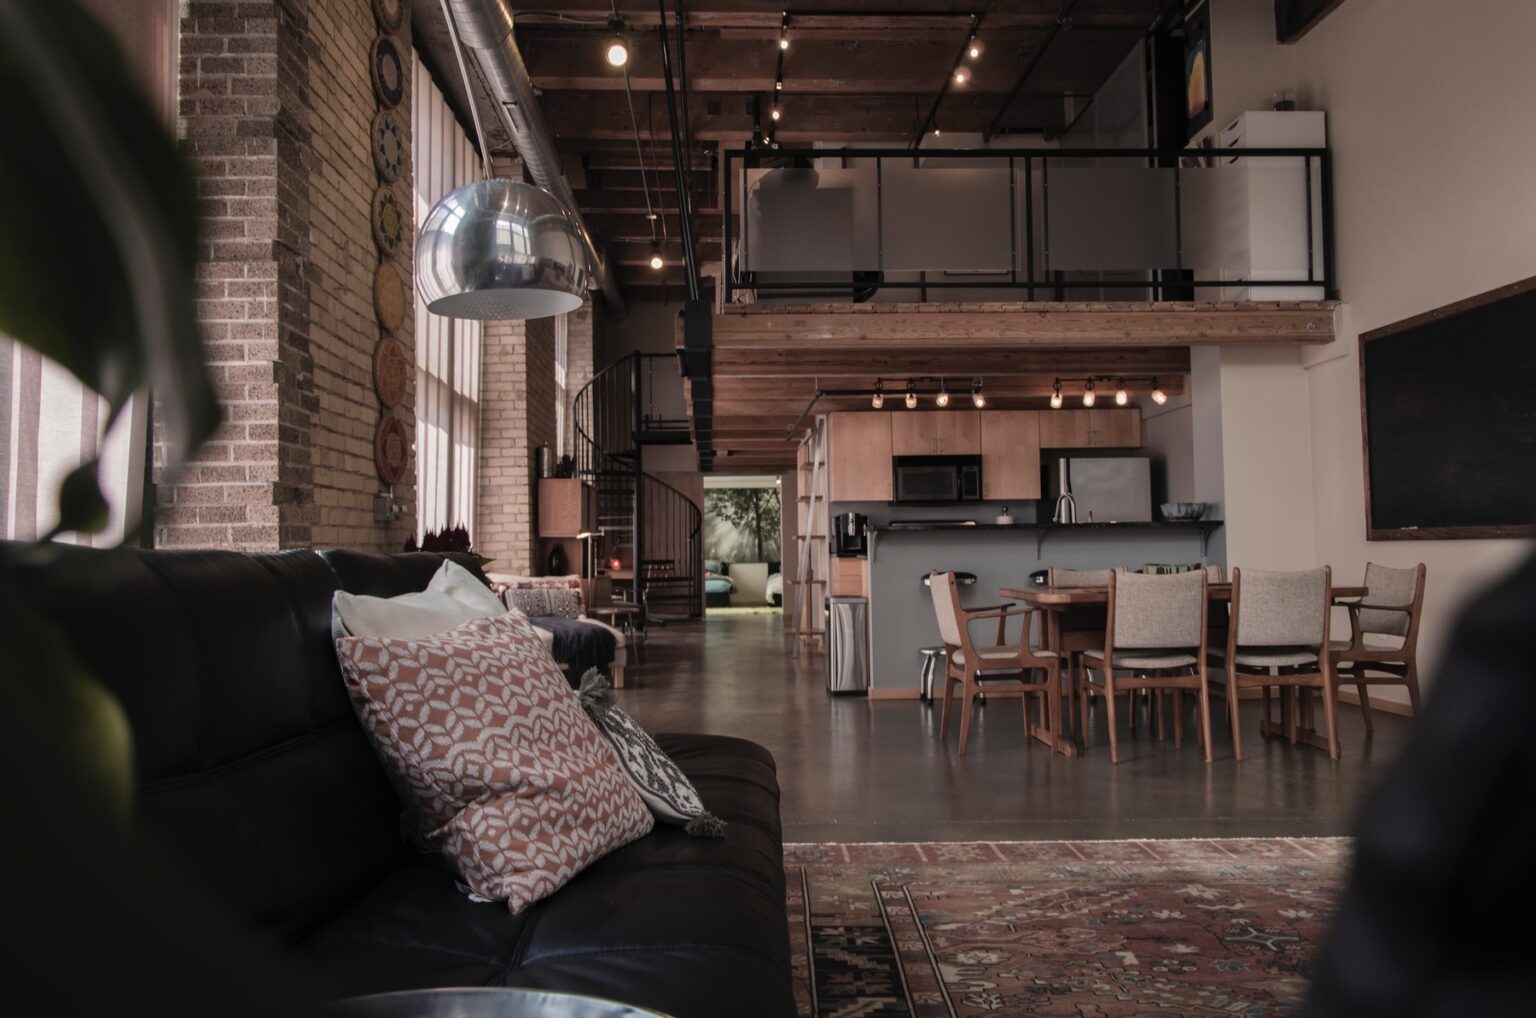 Industrial themed living room with bare floors and walls and a leather couch